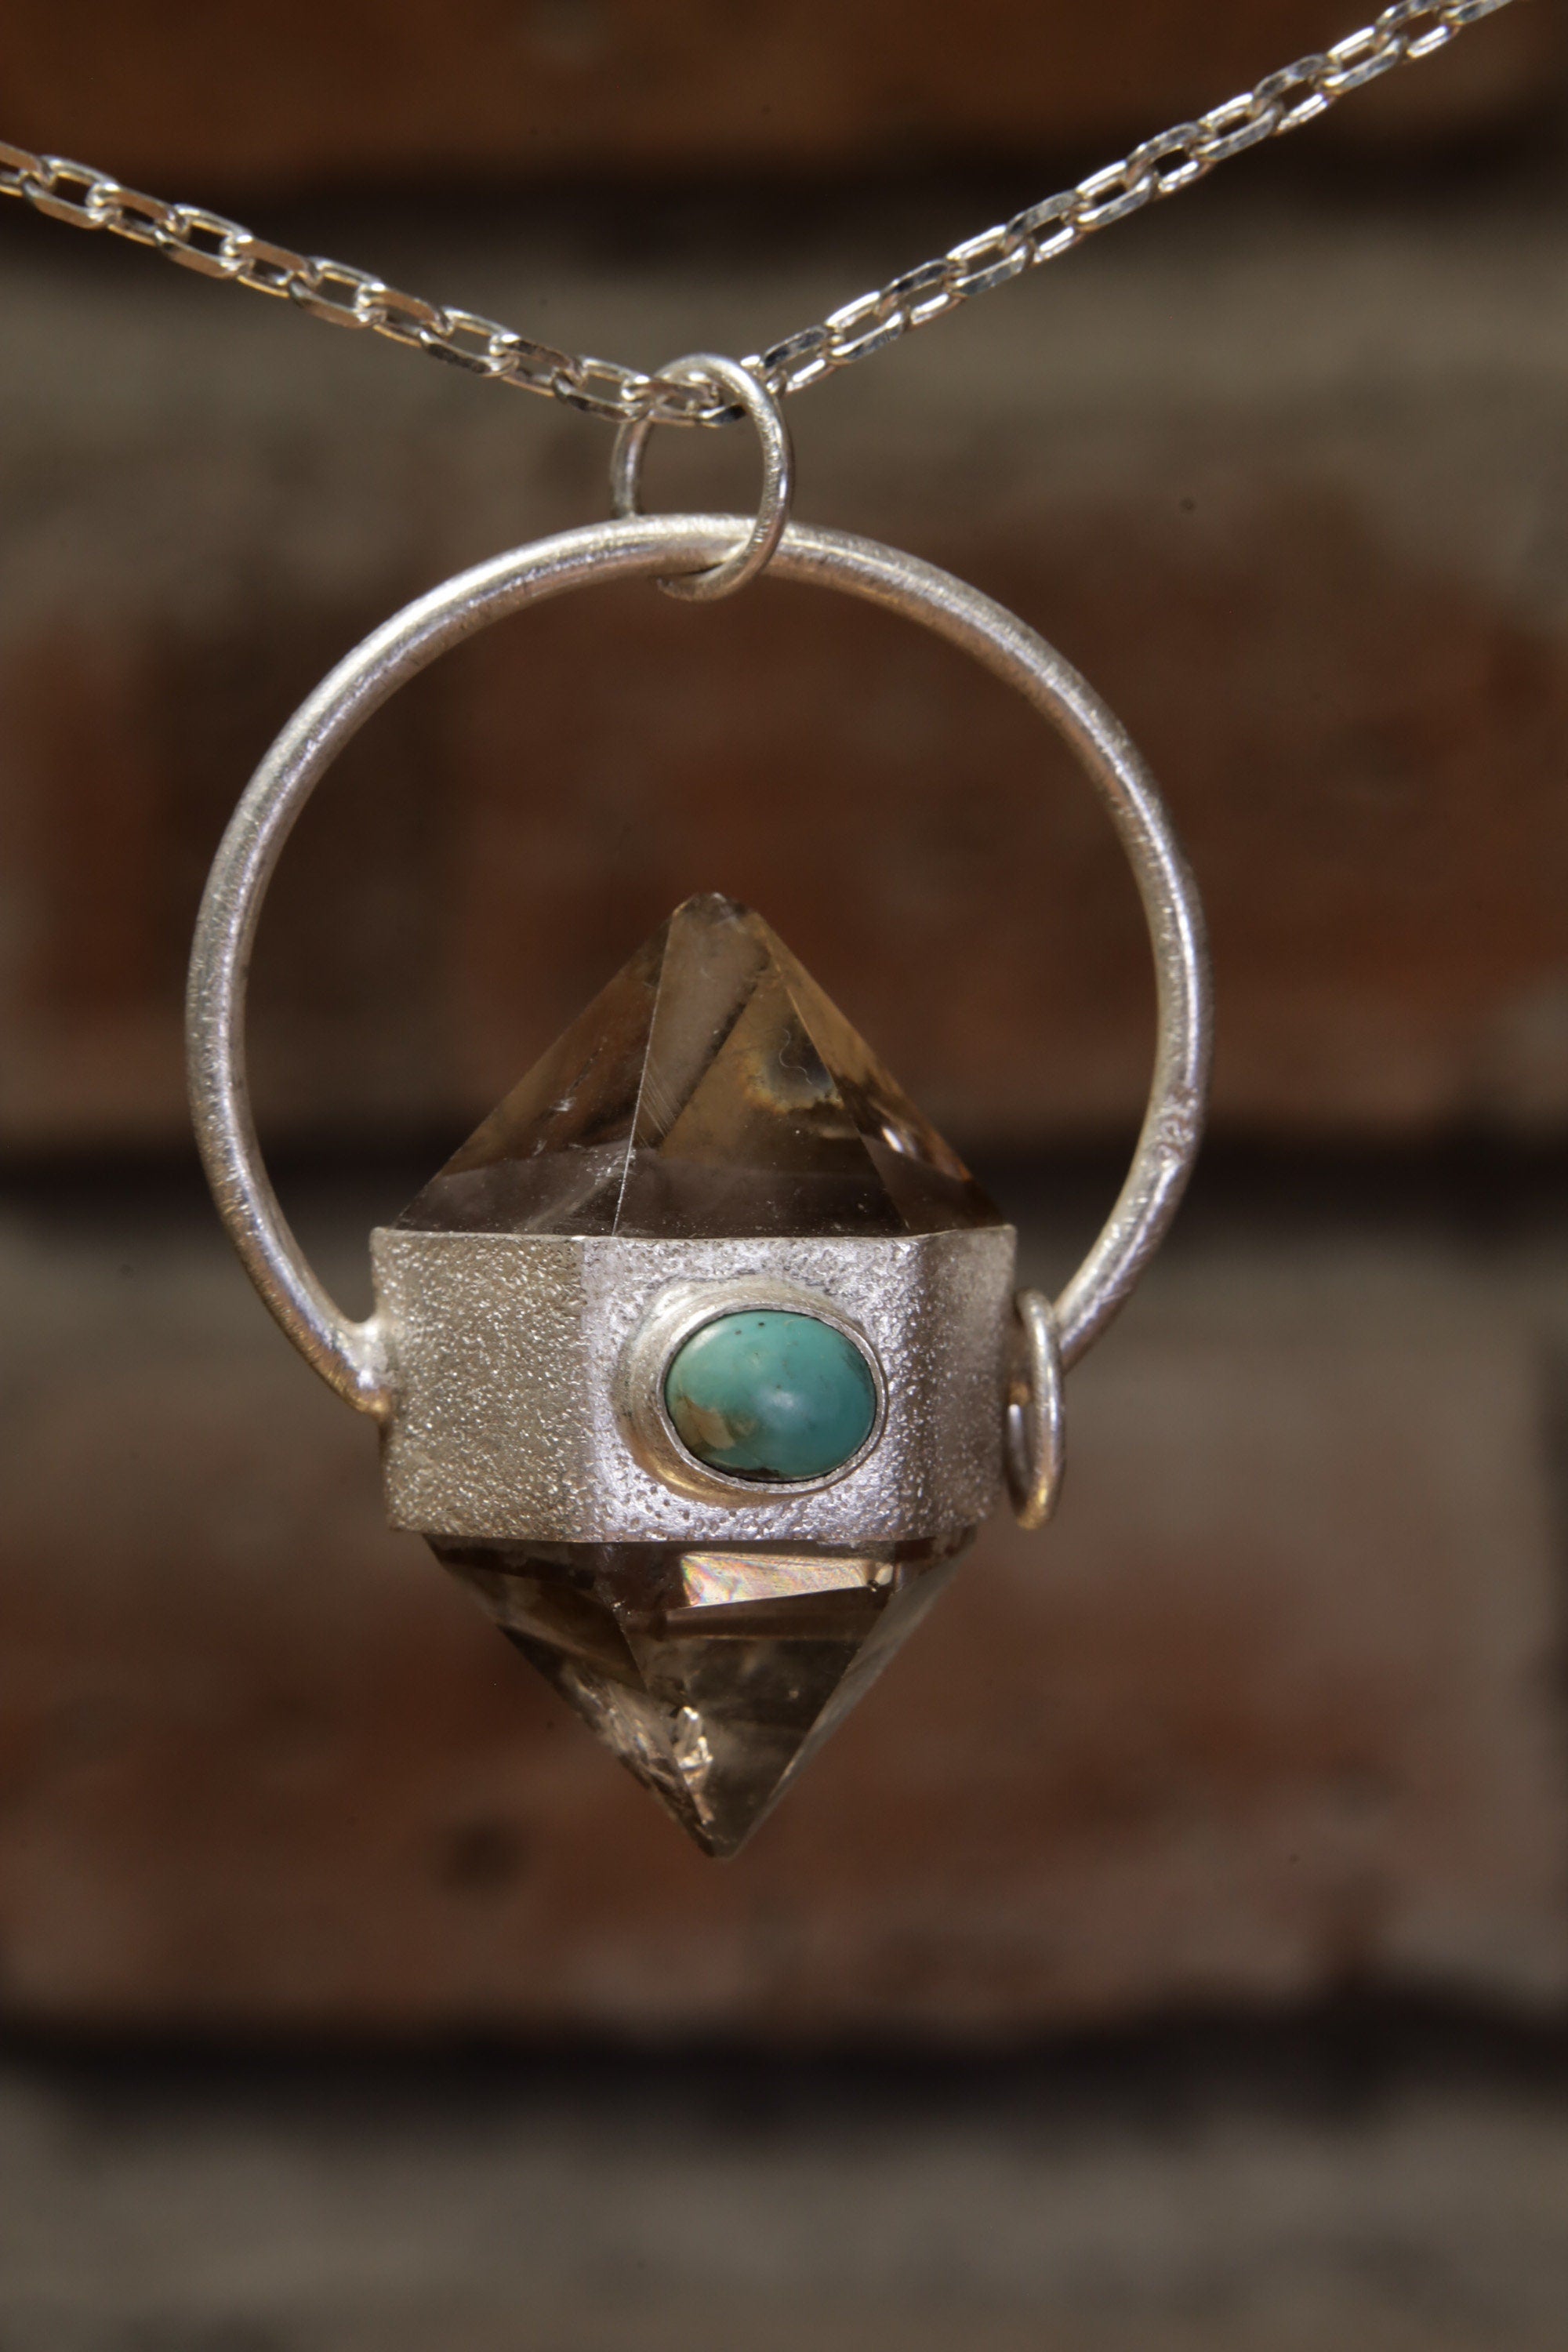 Earthen Radiance: Sterling Silver Sand-Textured Crystal Pendant with Double Terminated Cut Smokey Quartz and Persian Turquoise